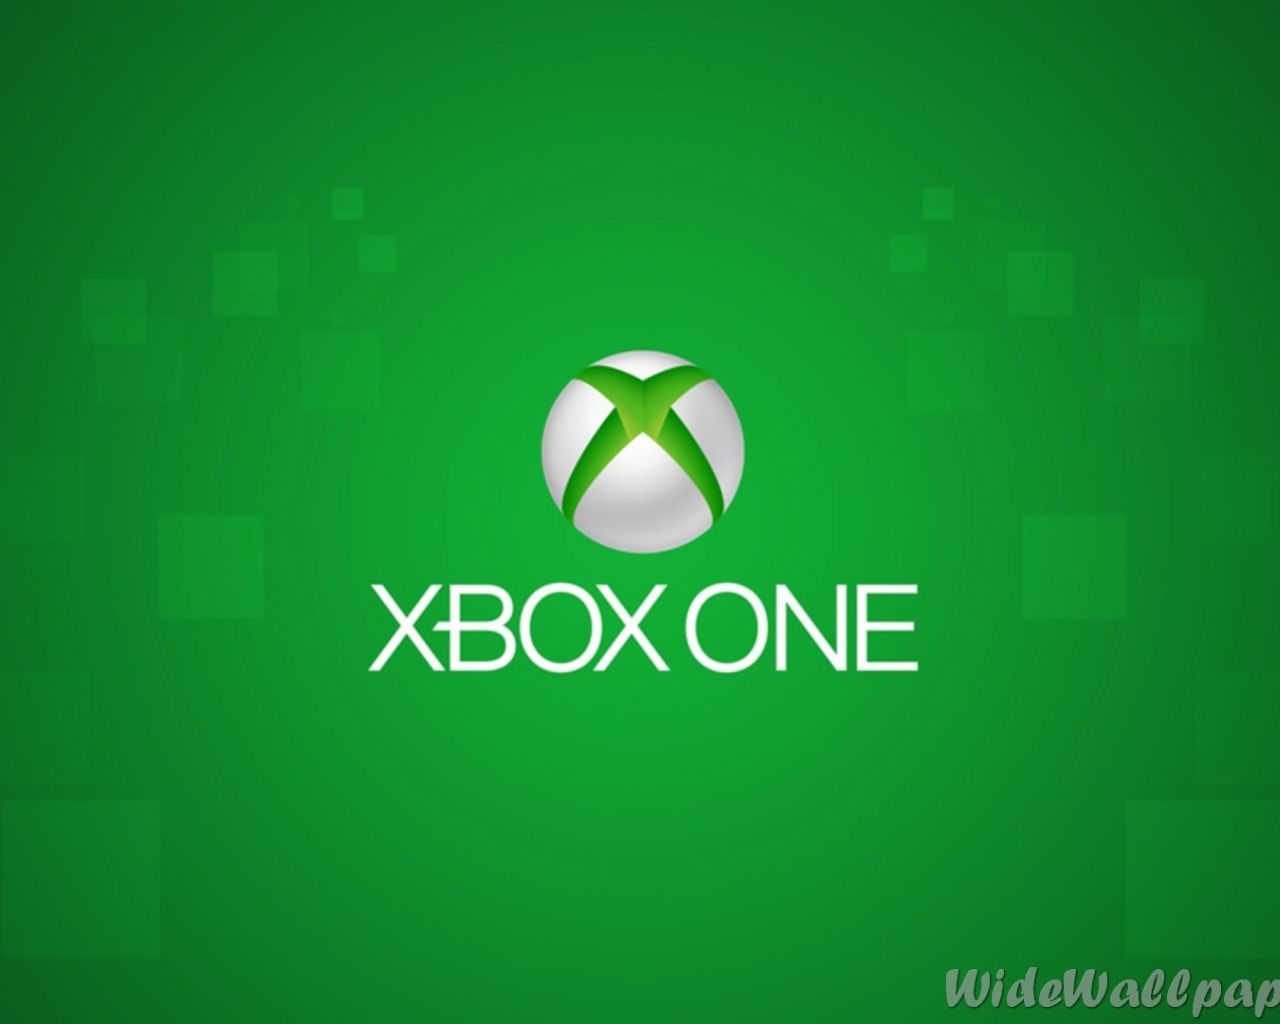 Cool Xbox Wallpapers on WallpaperDog